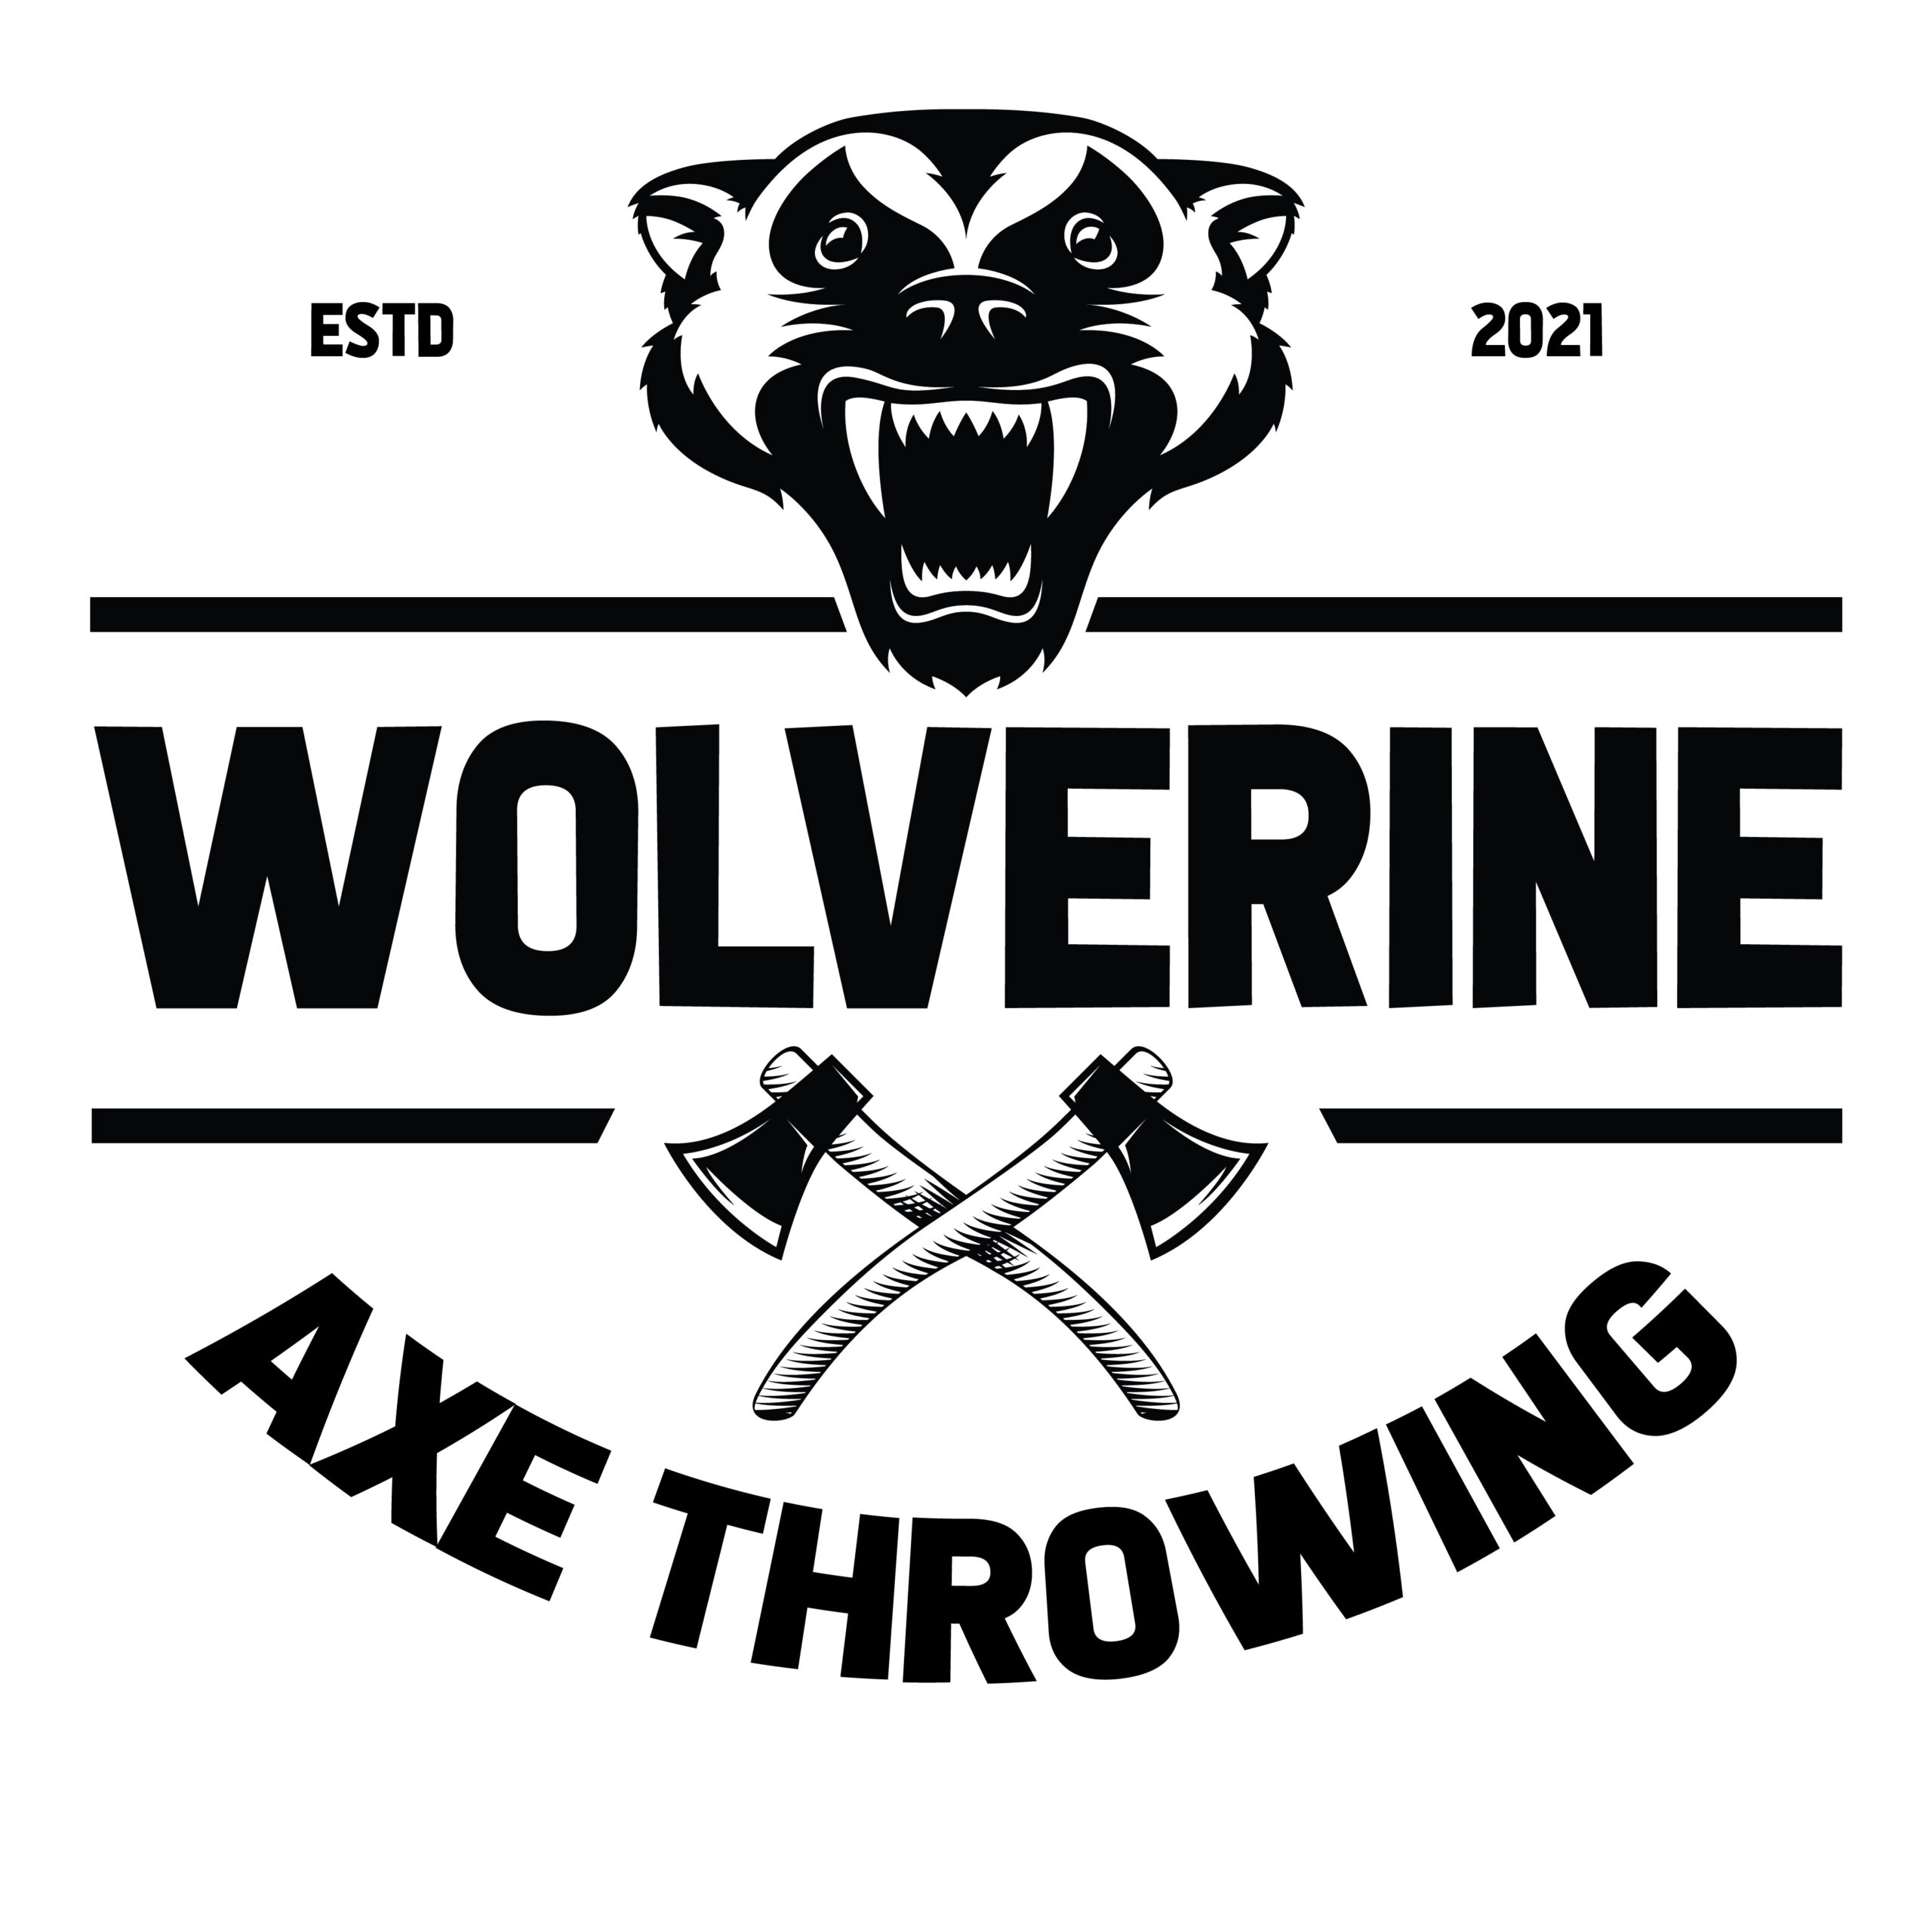 Wolverine Axe Throwing